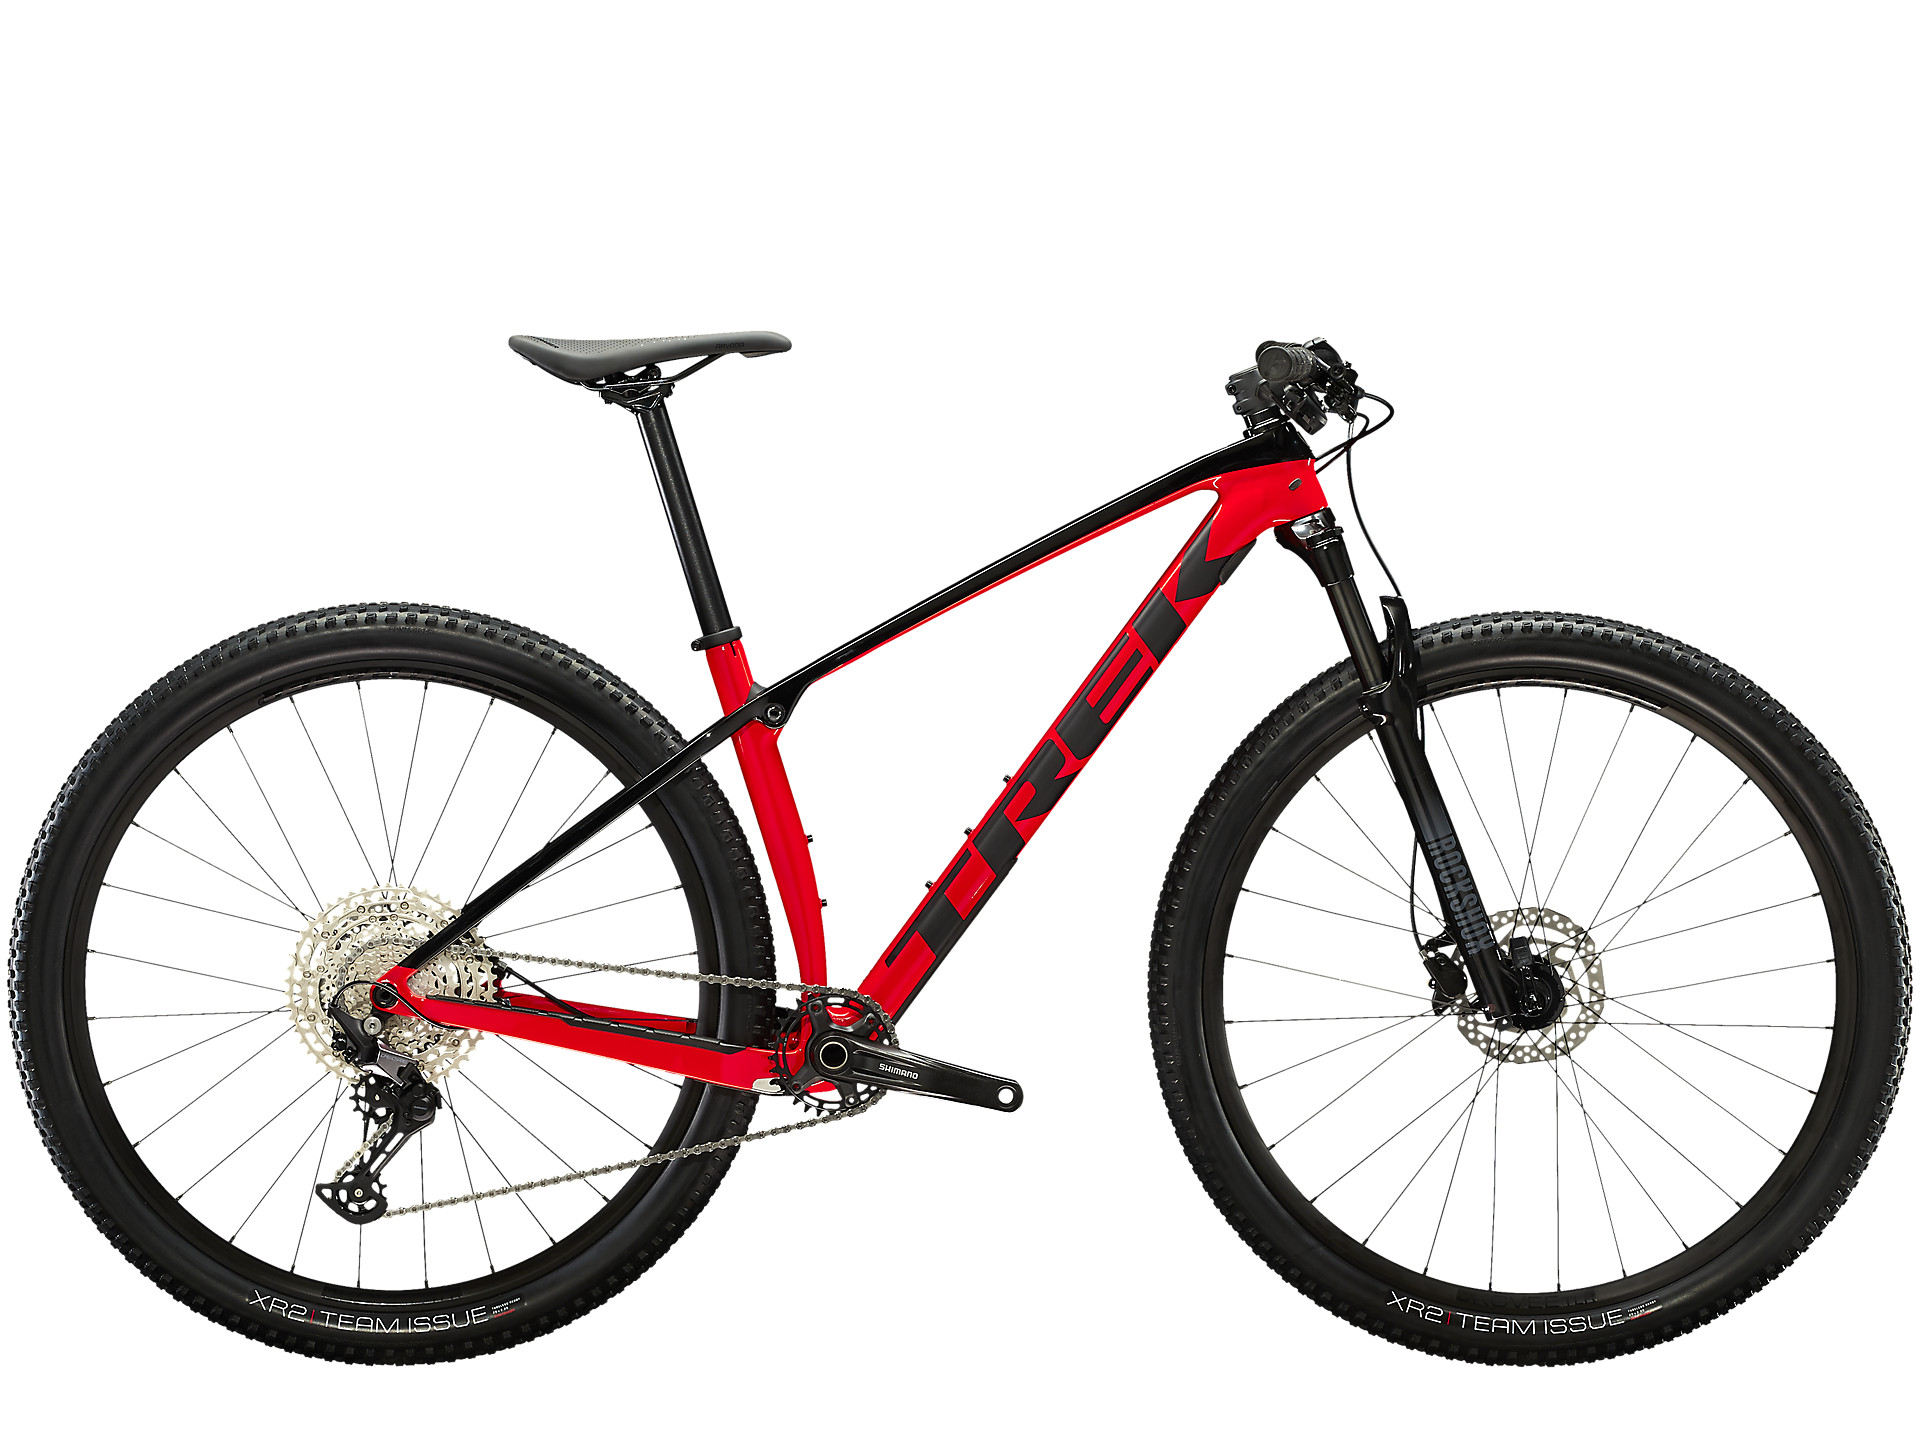 <a href="https://cycles-clement.be/product/procaliber-9-5-l-radioactive-red-trek-black/">PROCALIBER 9.5 L RADIOACTIVE RED/TREK BLACK</a>